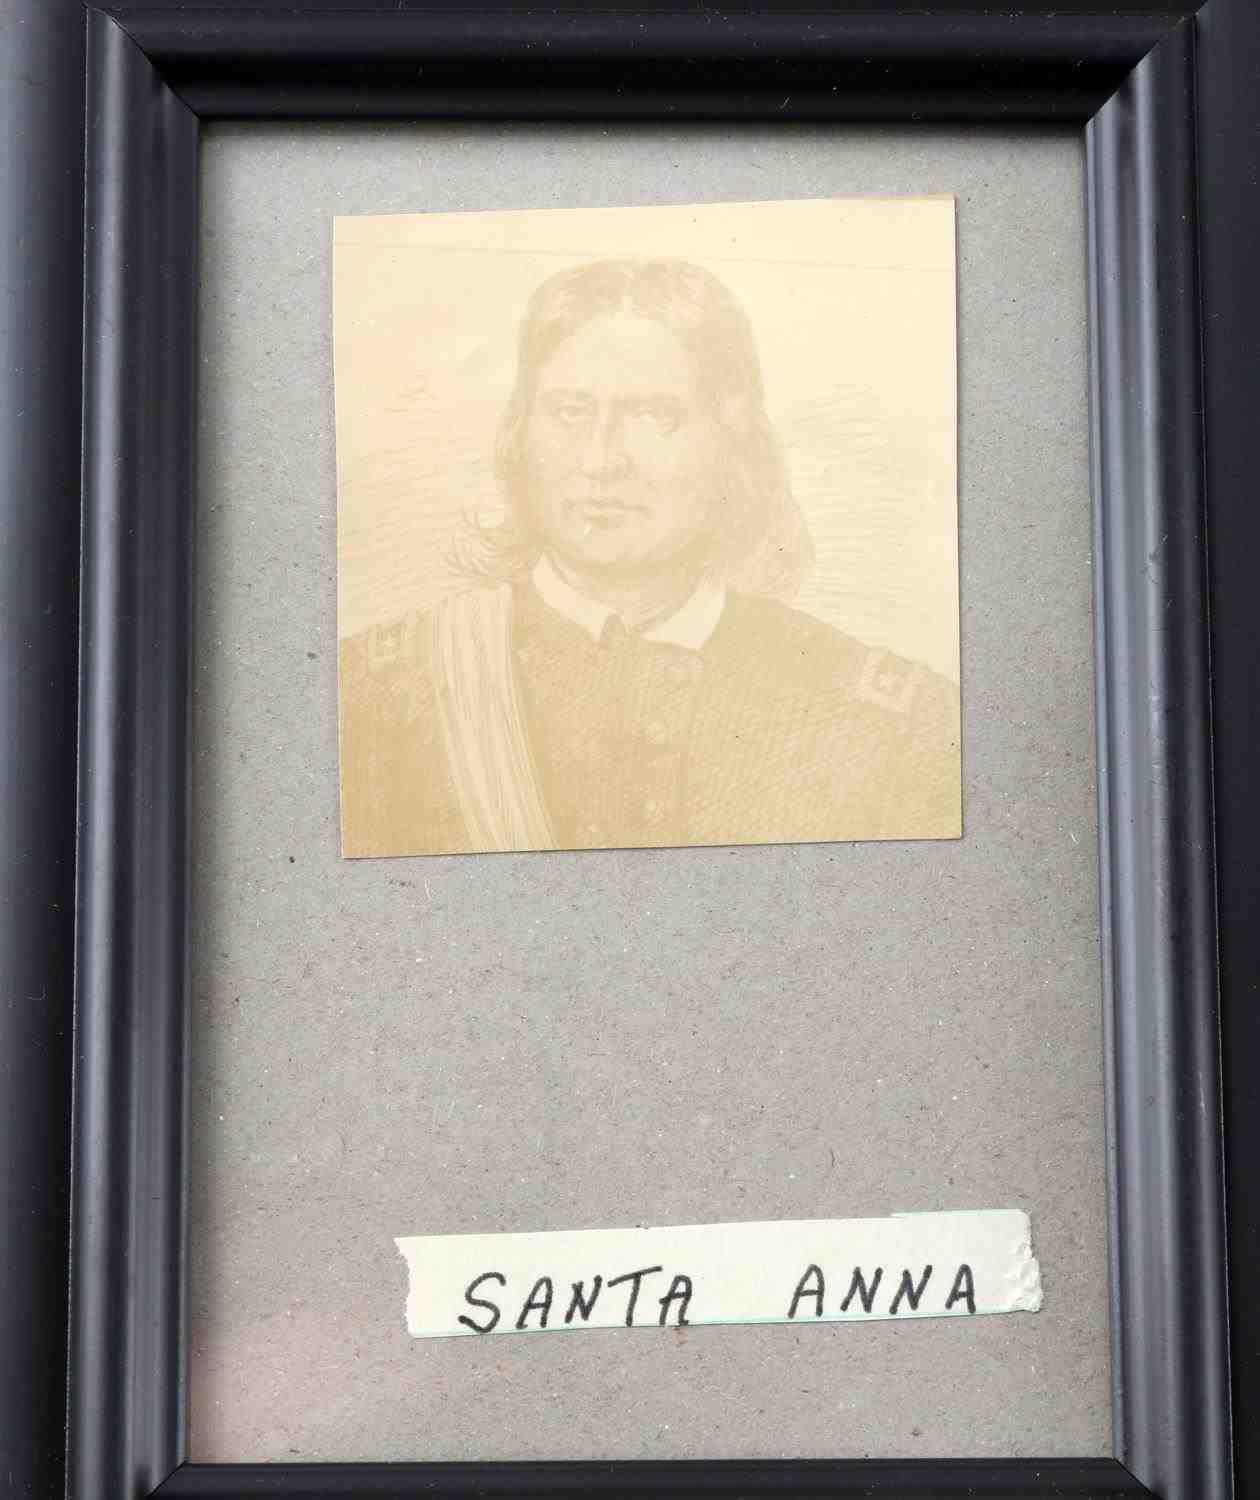 8 EARLY 20TH CENTURY FRAMED NATIVE AMERICAN PHOTOS